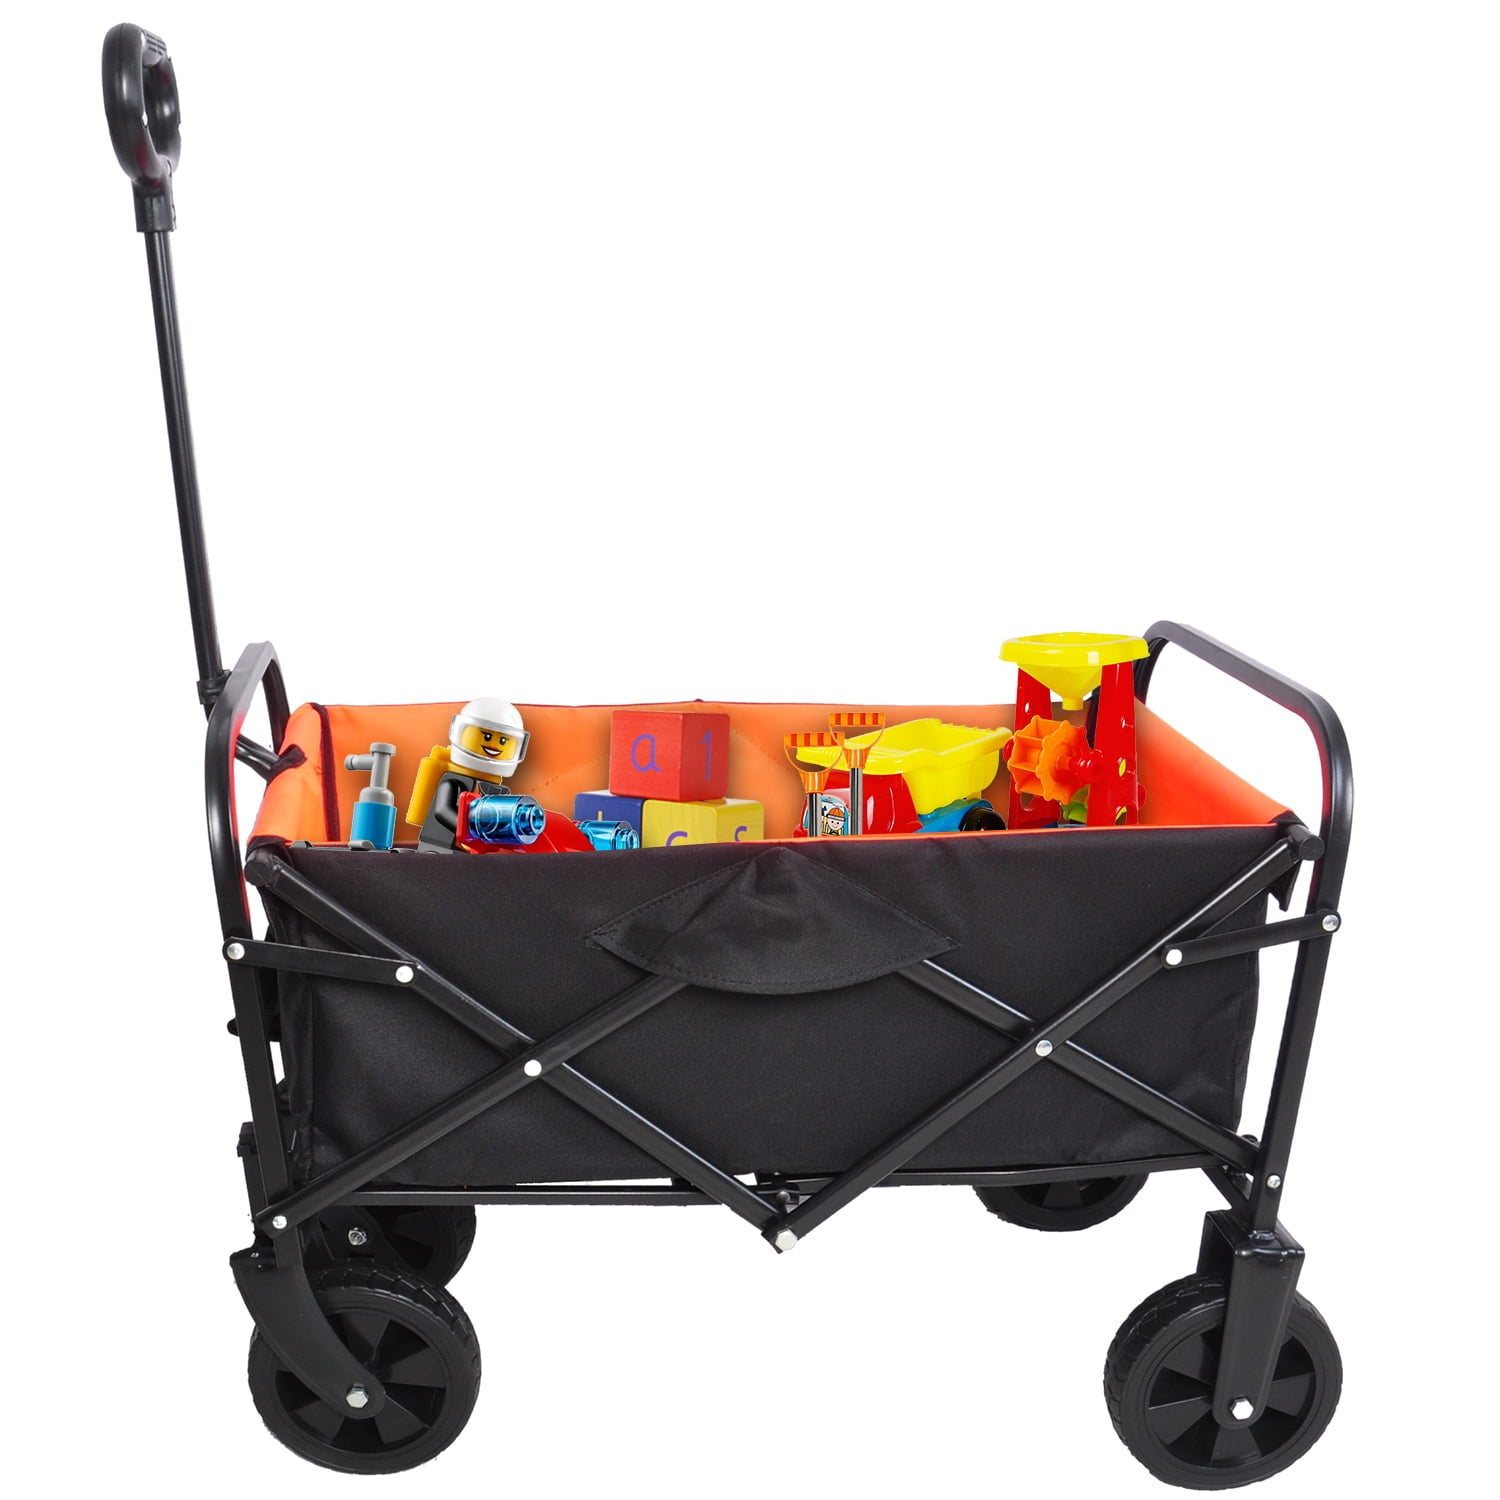 Folding Shopping Cart with 4 Wheels Transit Utility Cart Grocery Camping Cart 